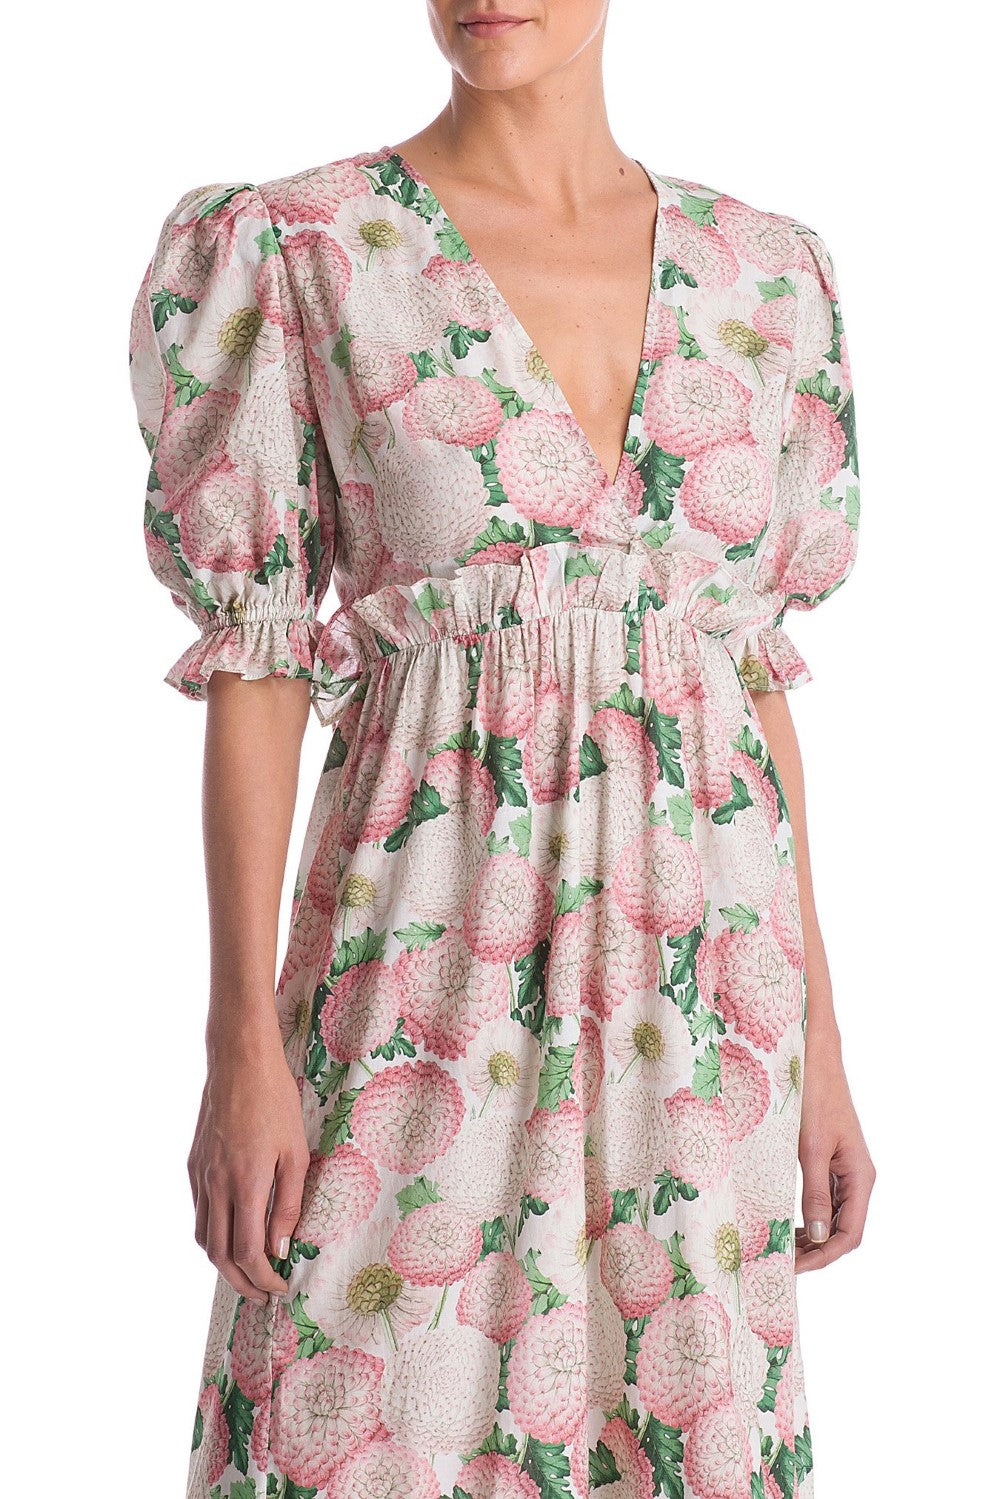 Inspired from vintage silhouettes, this dress is crafted from silk, to an airy, balloon sleeved silhouette with subtly padded shoulders- the wrap-around shape is very practical and you can wear also as a cover up